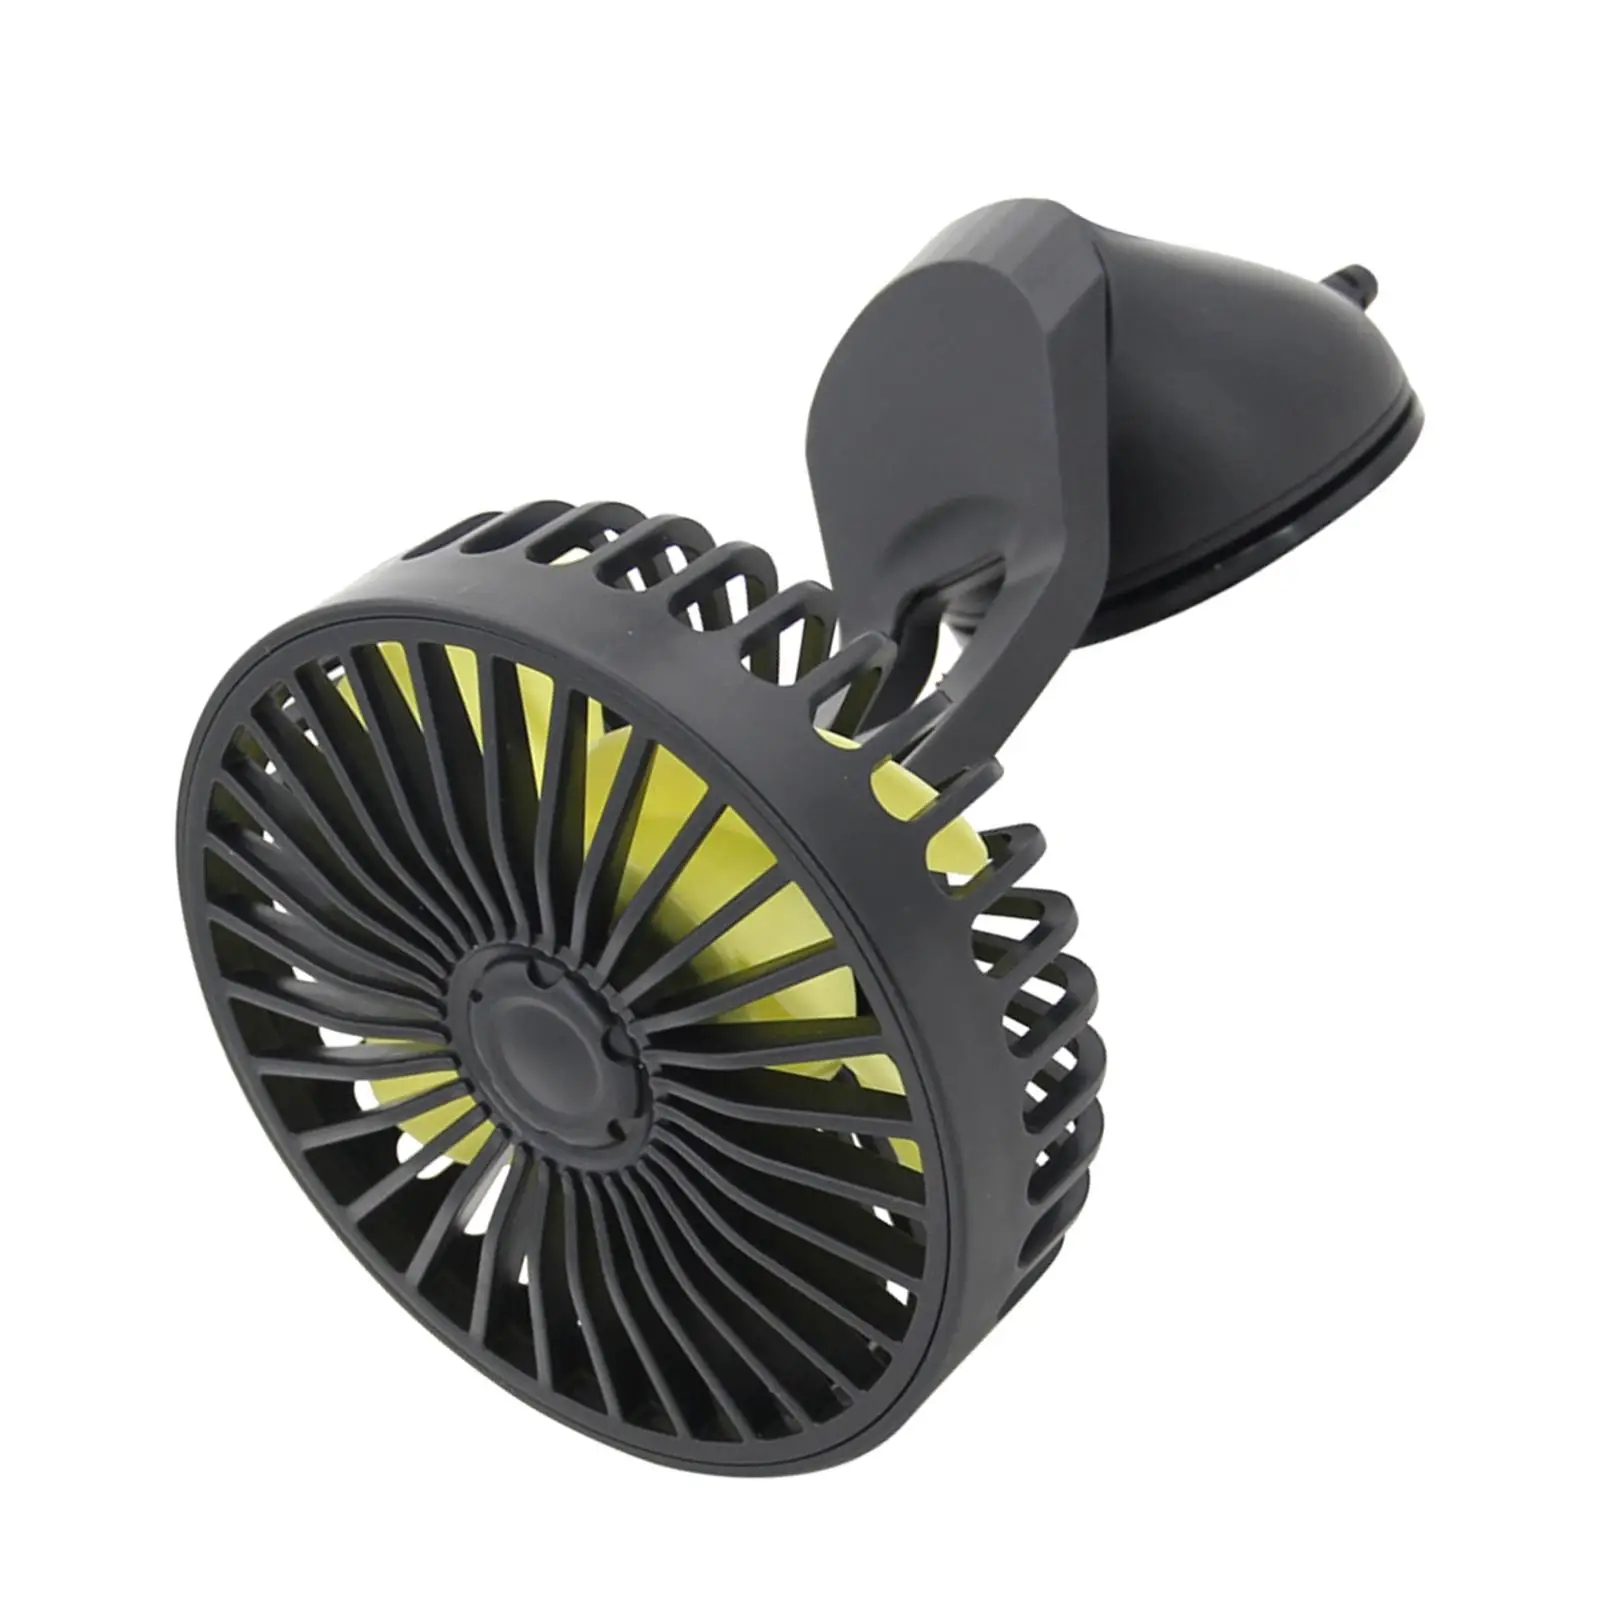 USB Fan Variable Speed Air Cooler Small for Car Dashboard Vehicle Boat